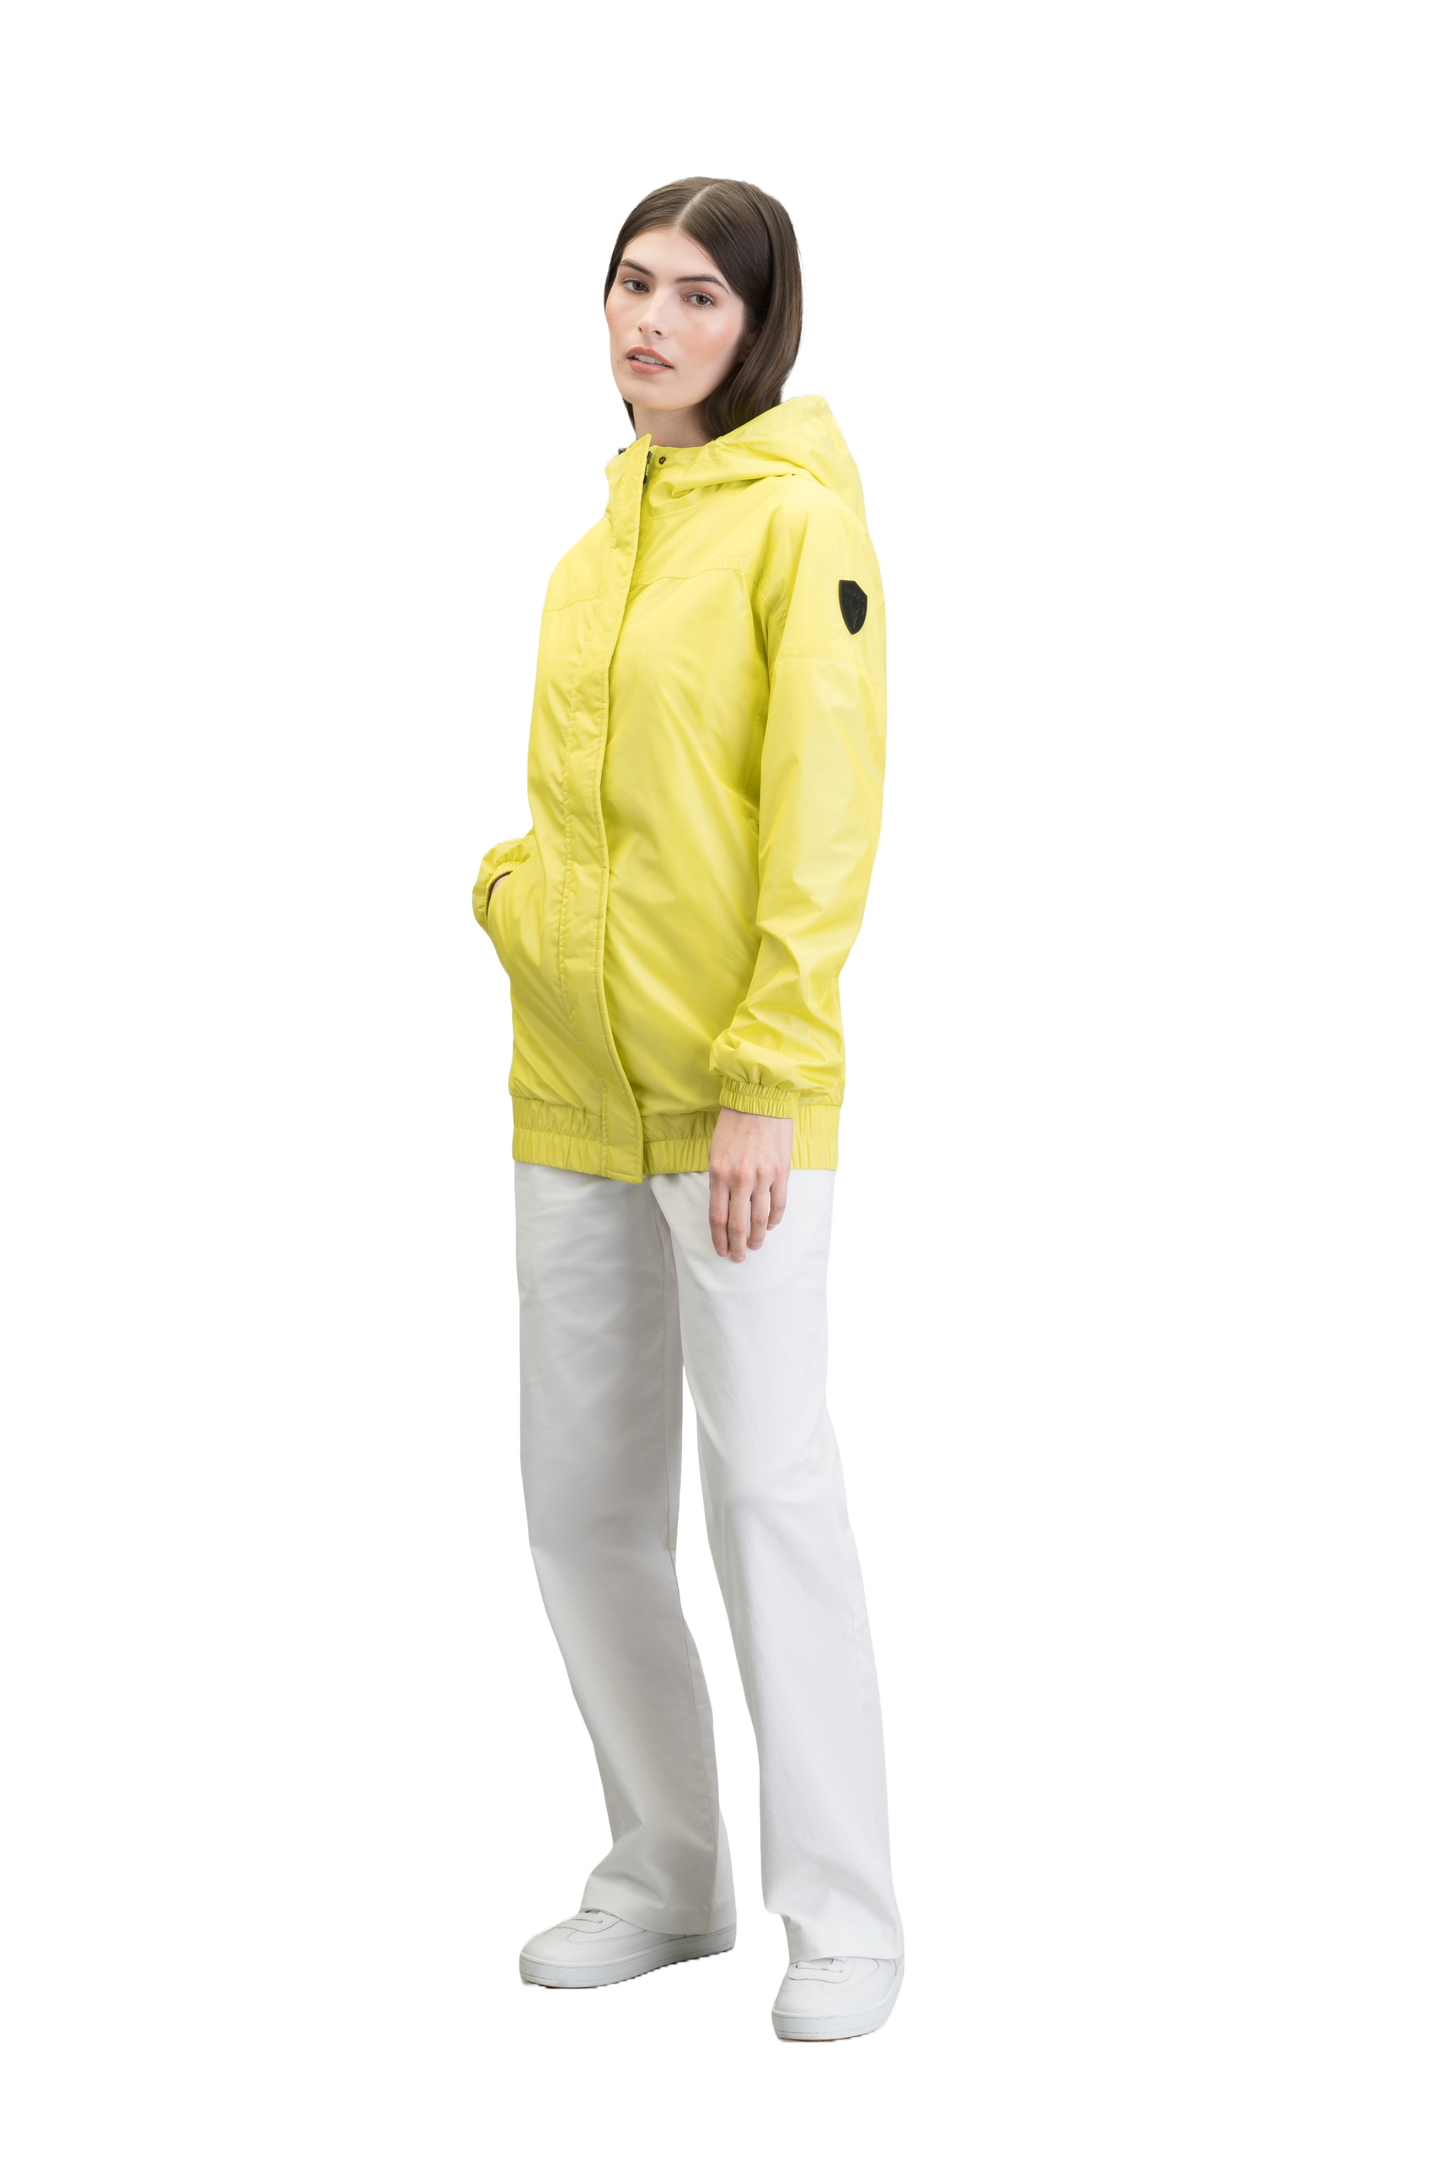 Hartley Women's Tailored Rain Jacket in hip length, two-way centre front zipper with wind flap, toggle adjustable cuffs and waist cord, non-removable hood, side entry waist pockets, in Sulphur Spring